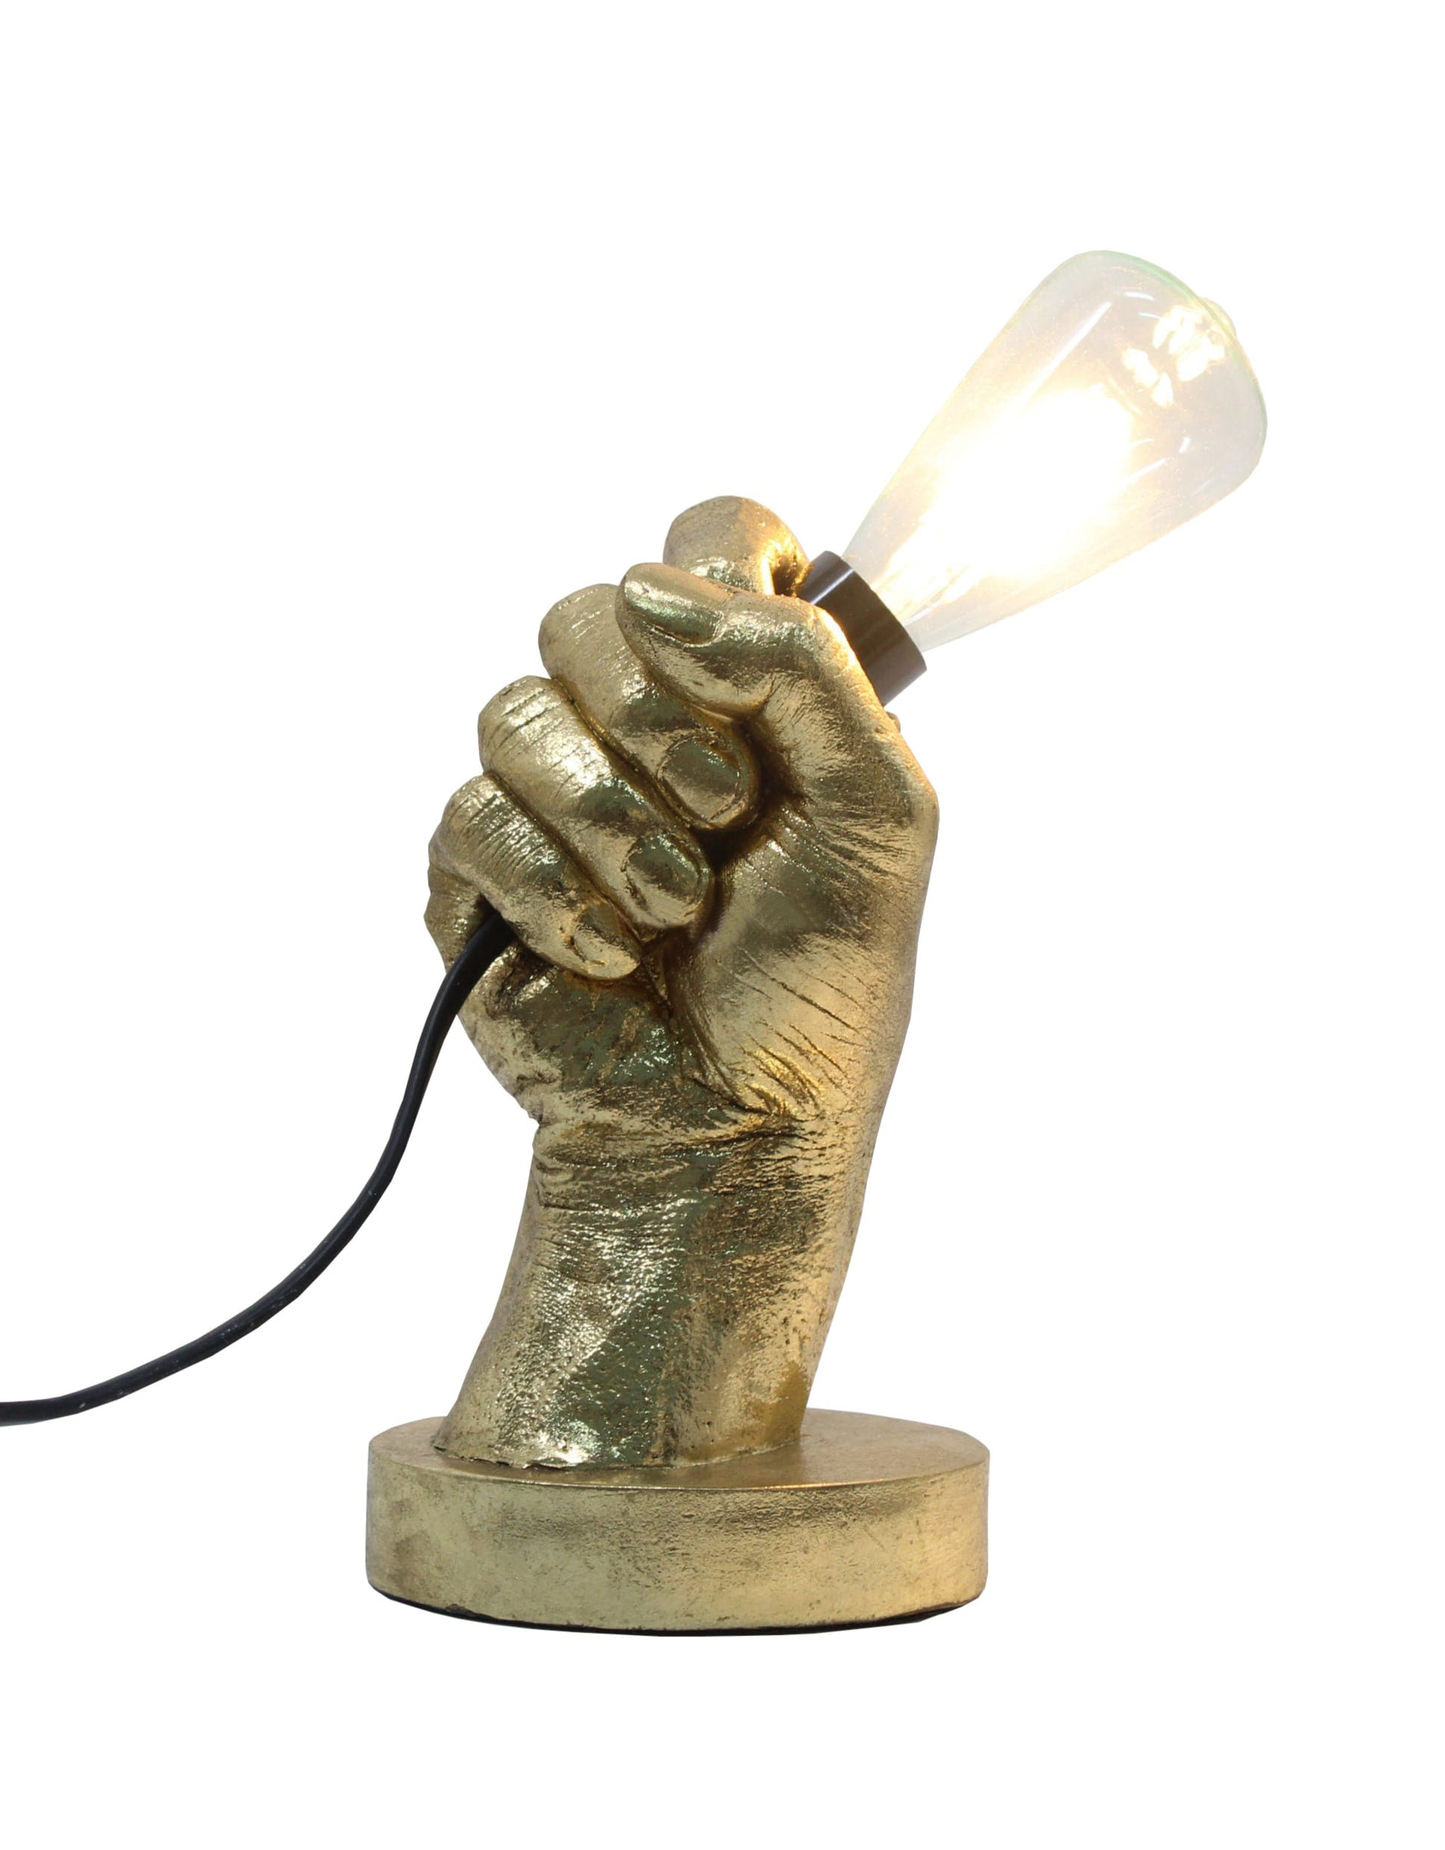 Gold "Hand Held" Table Lamp